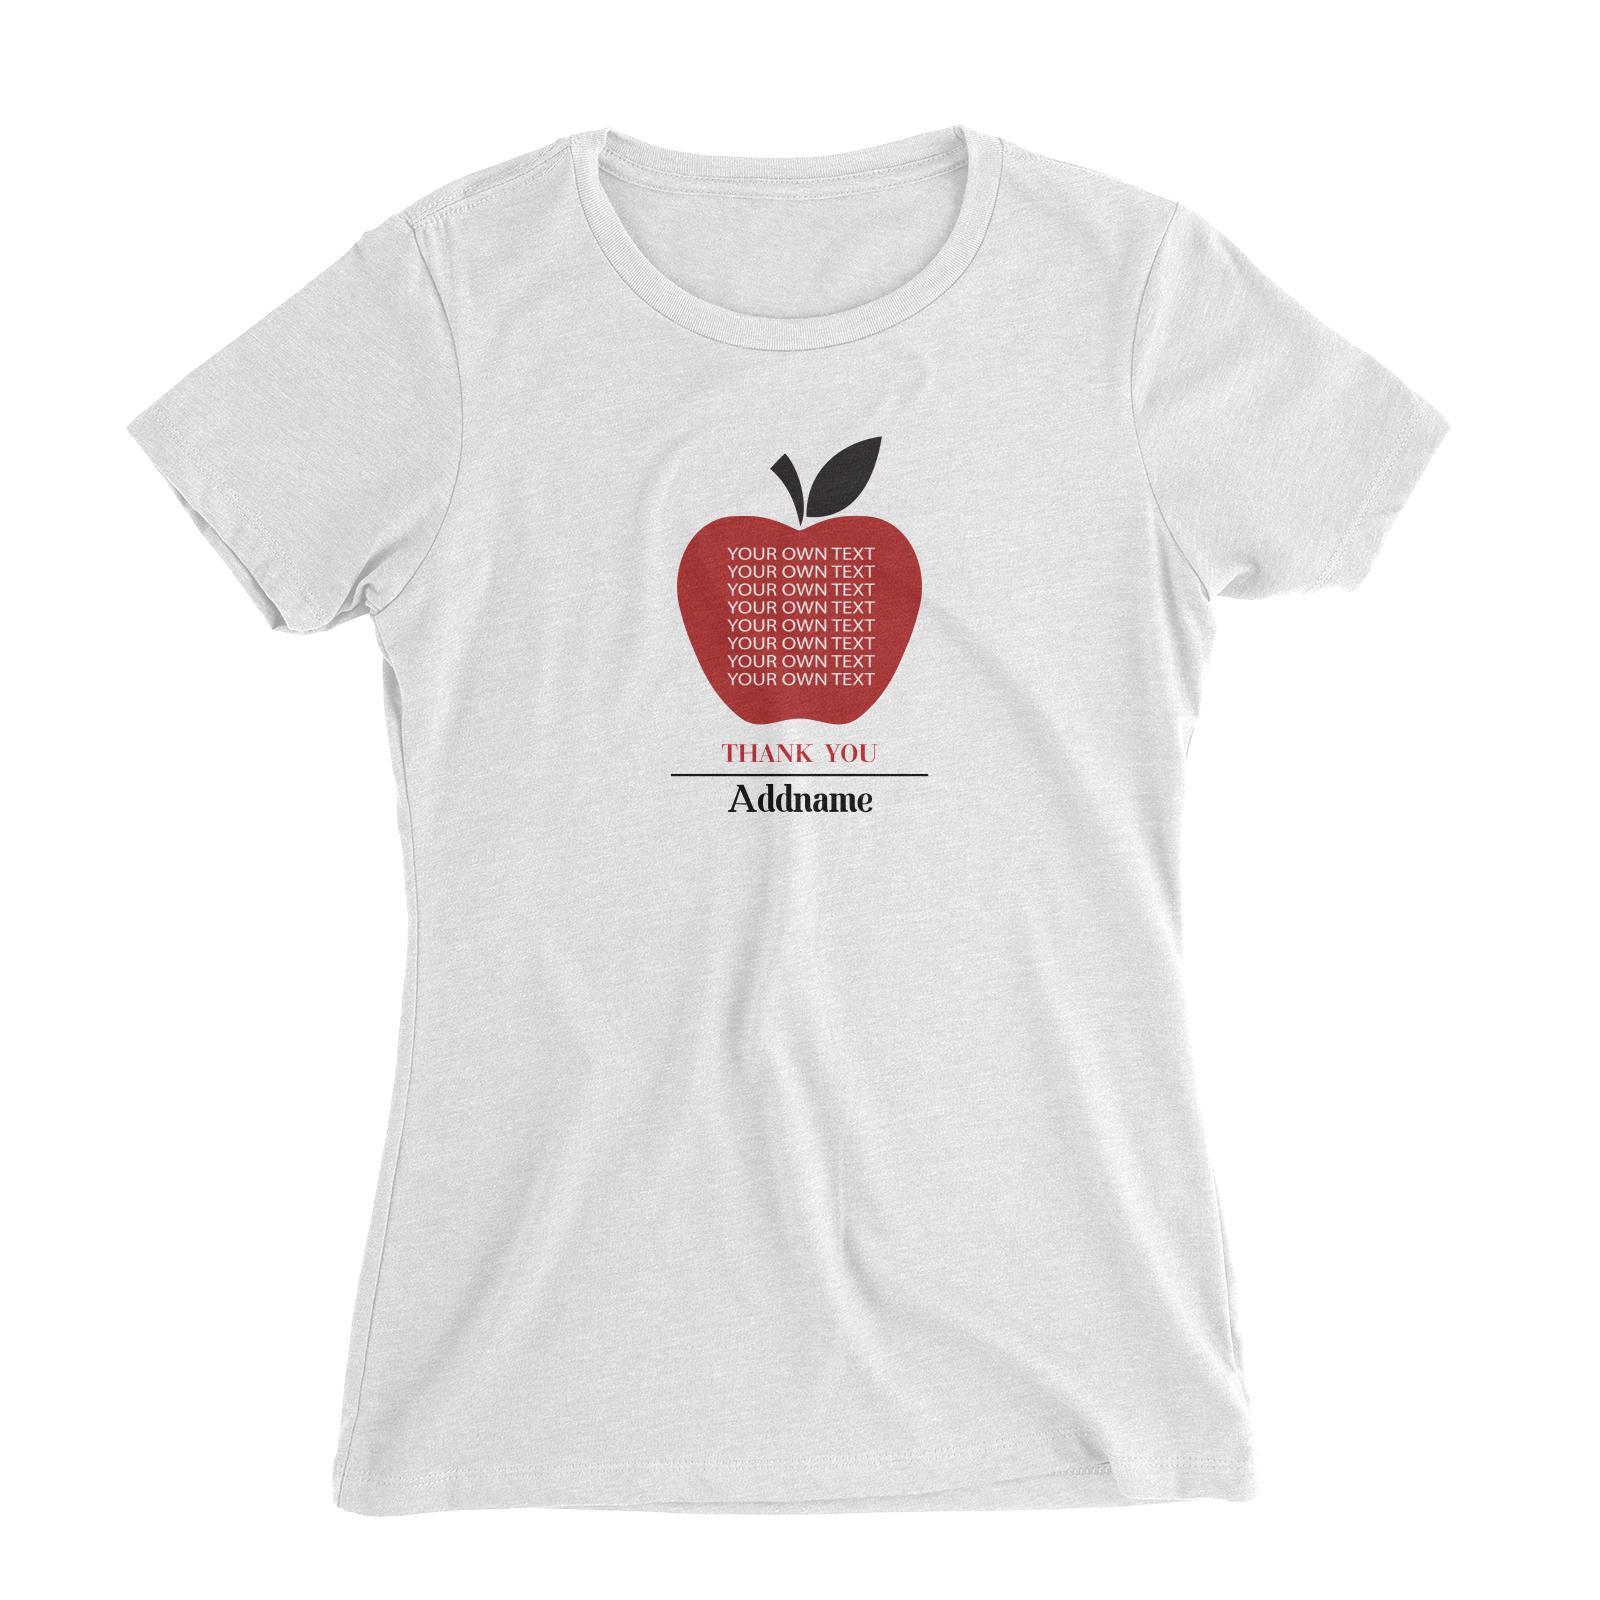 Teacher Addname Big Red Apple Thank You Addname & Add Text Women's Slim Fit T-Shirt